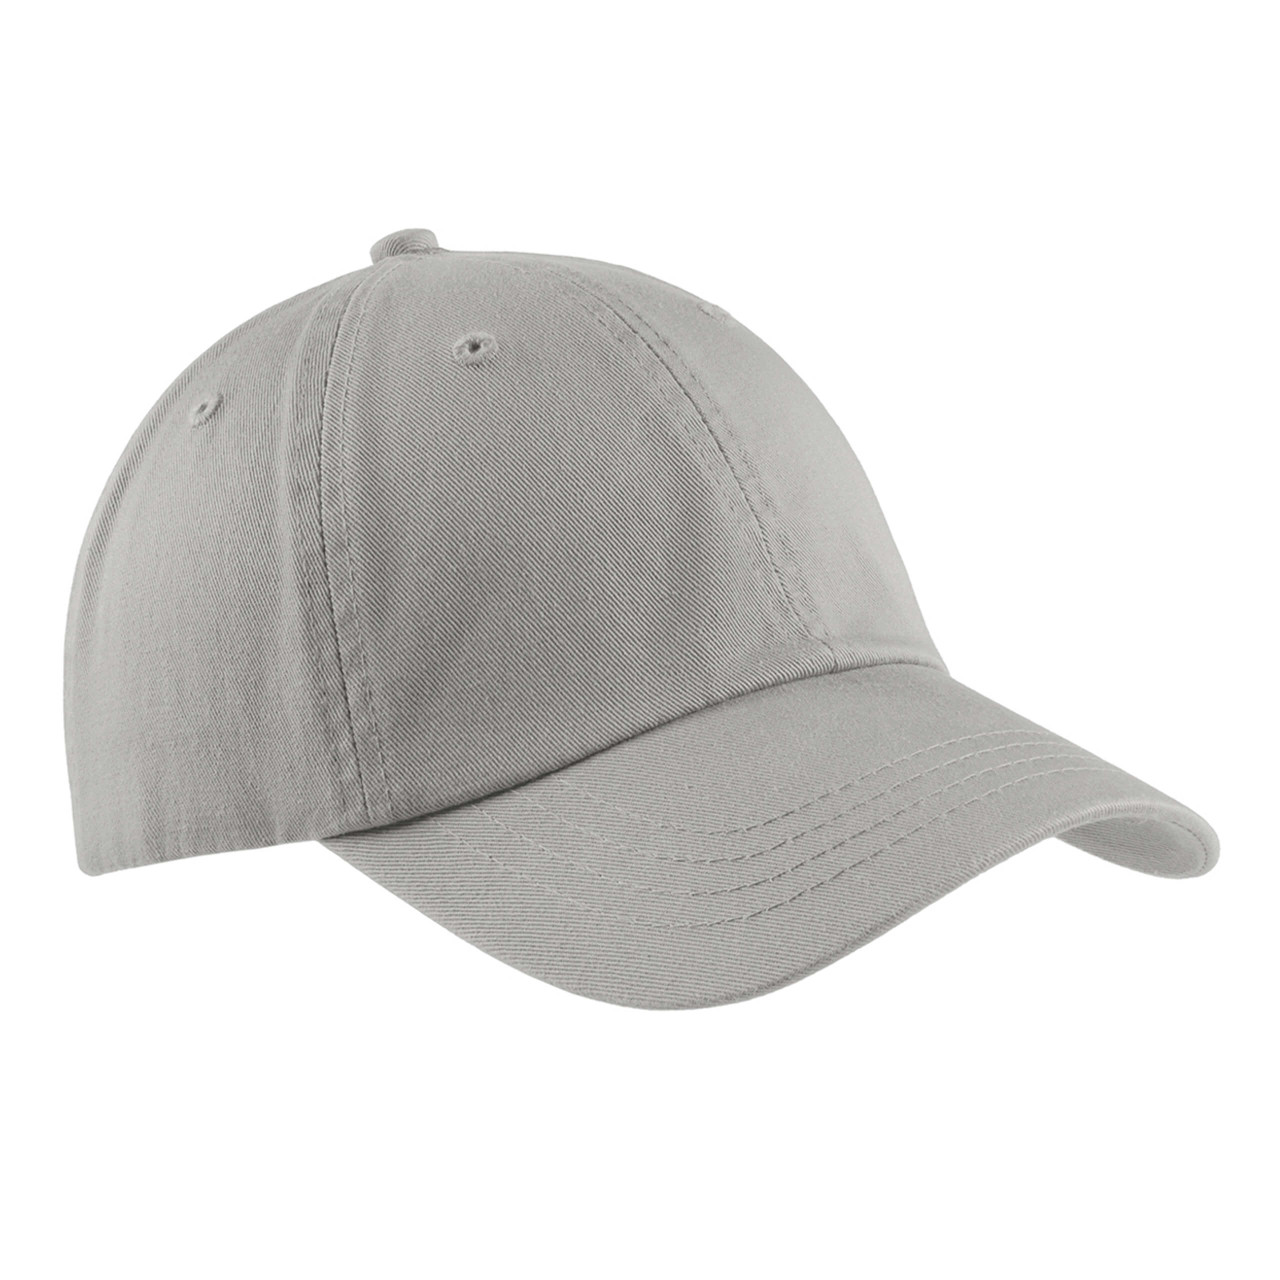 Chrome Baseball Hat Blank Unstructured Washed Twill Cap